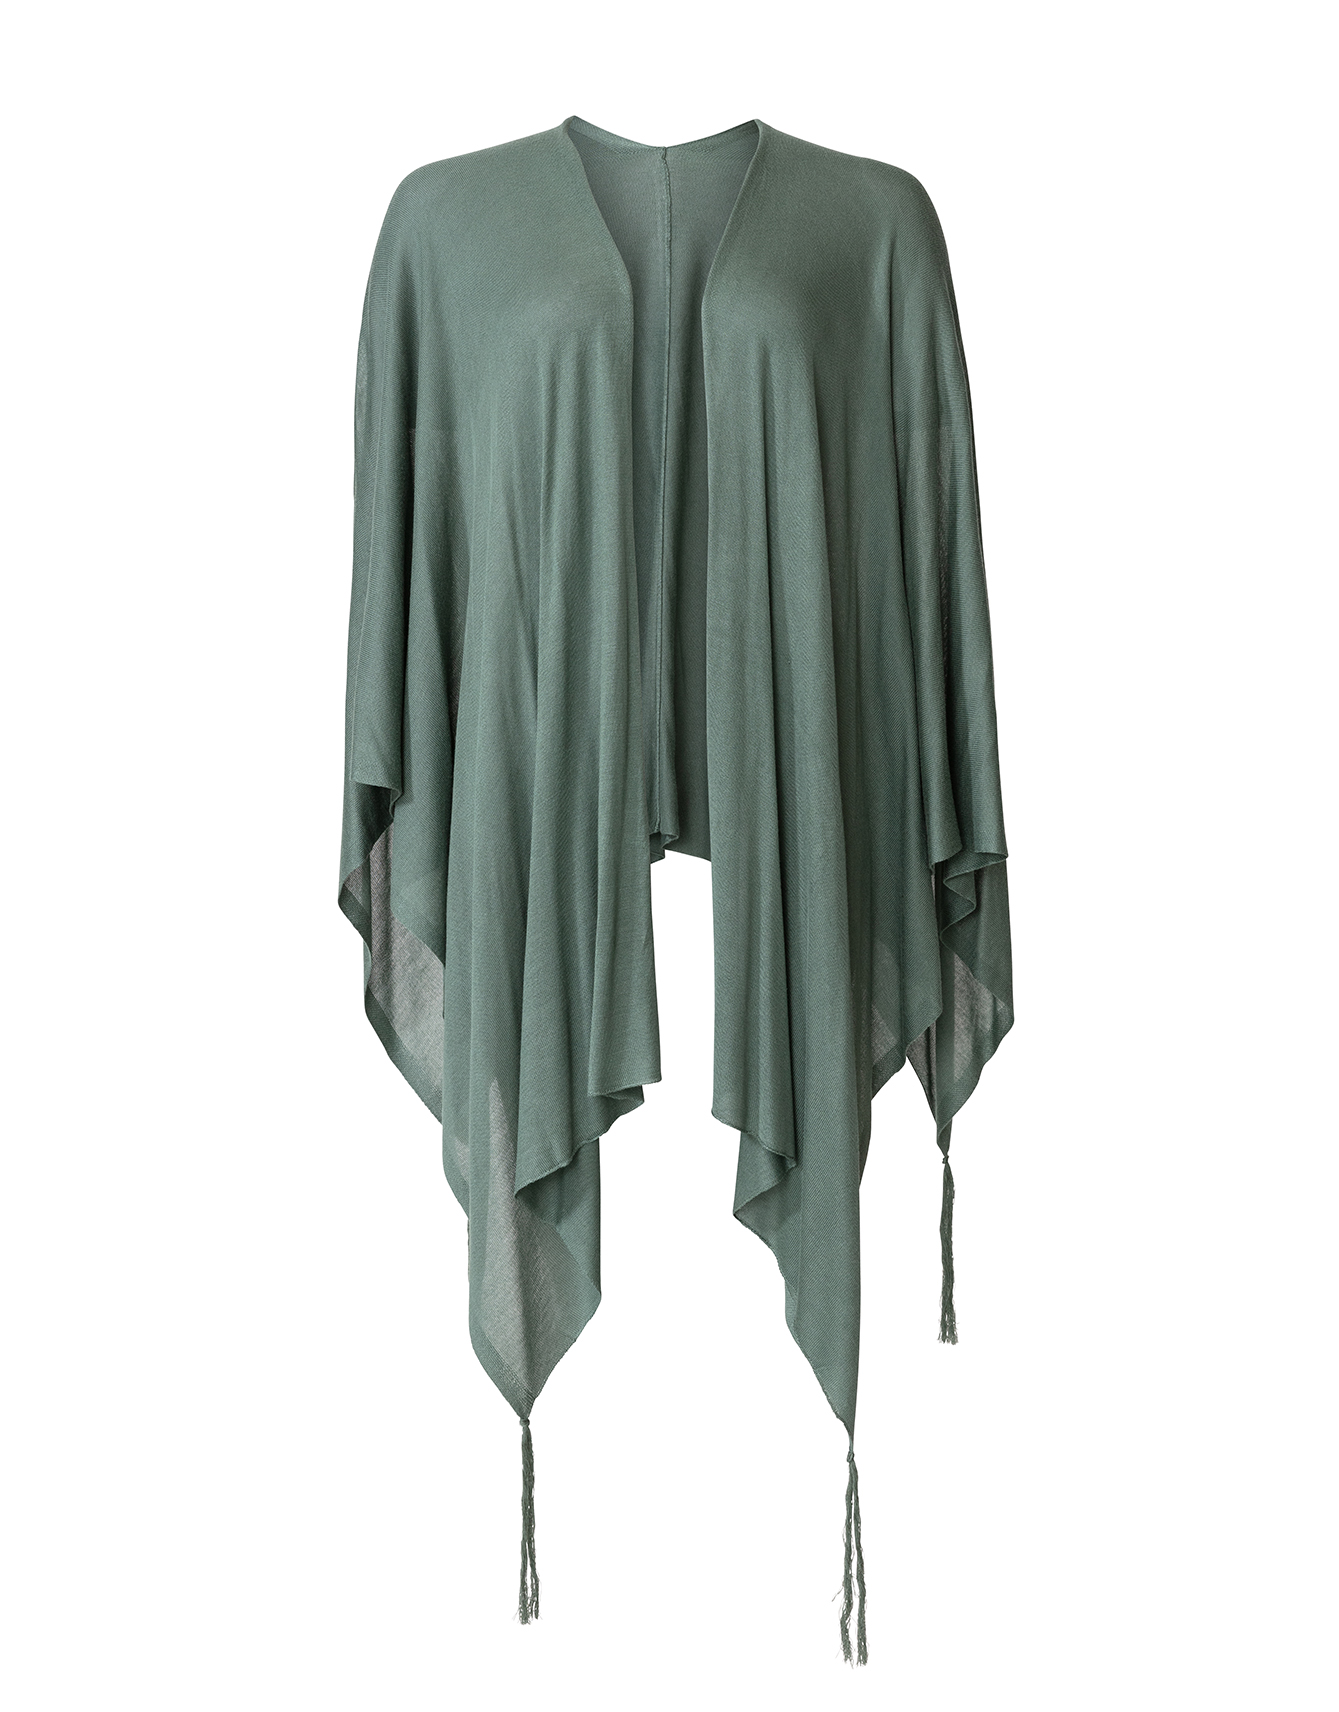 Poncho with tassels